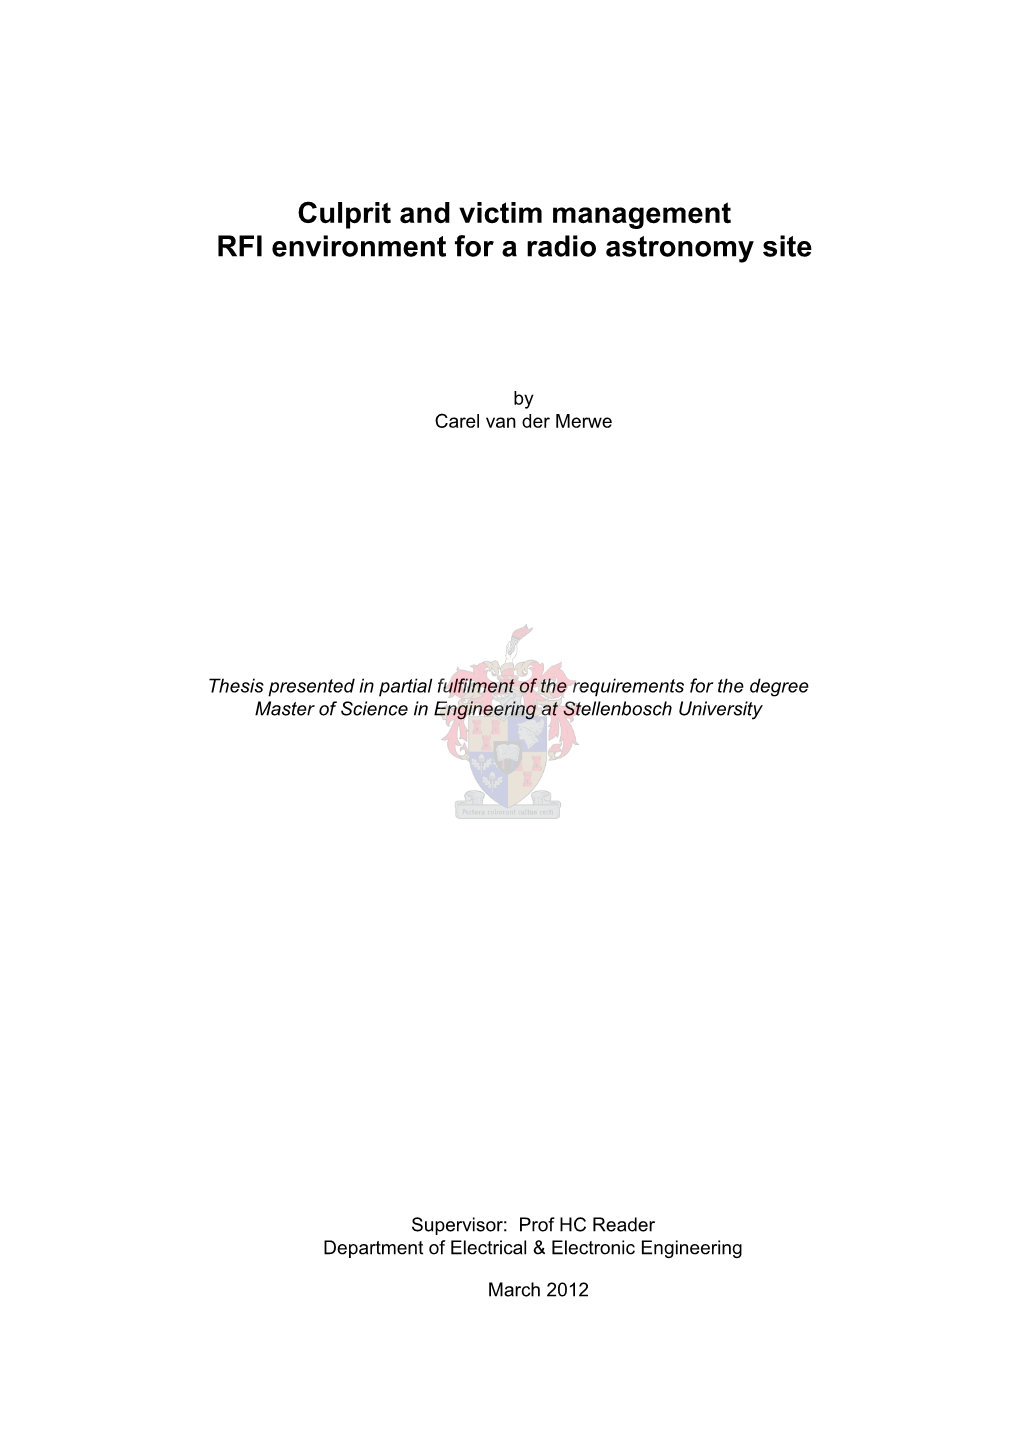 Culprit and Victim Management RFI Environment for a Radio Astronomy Site